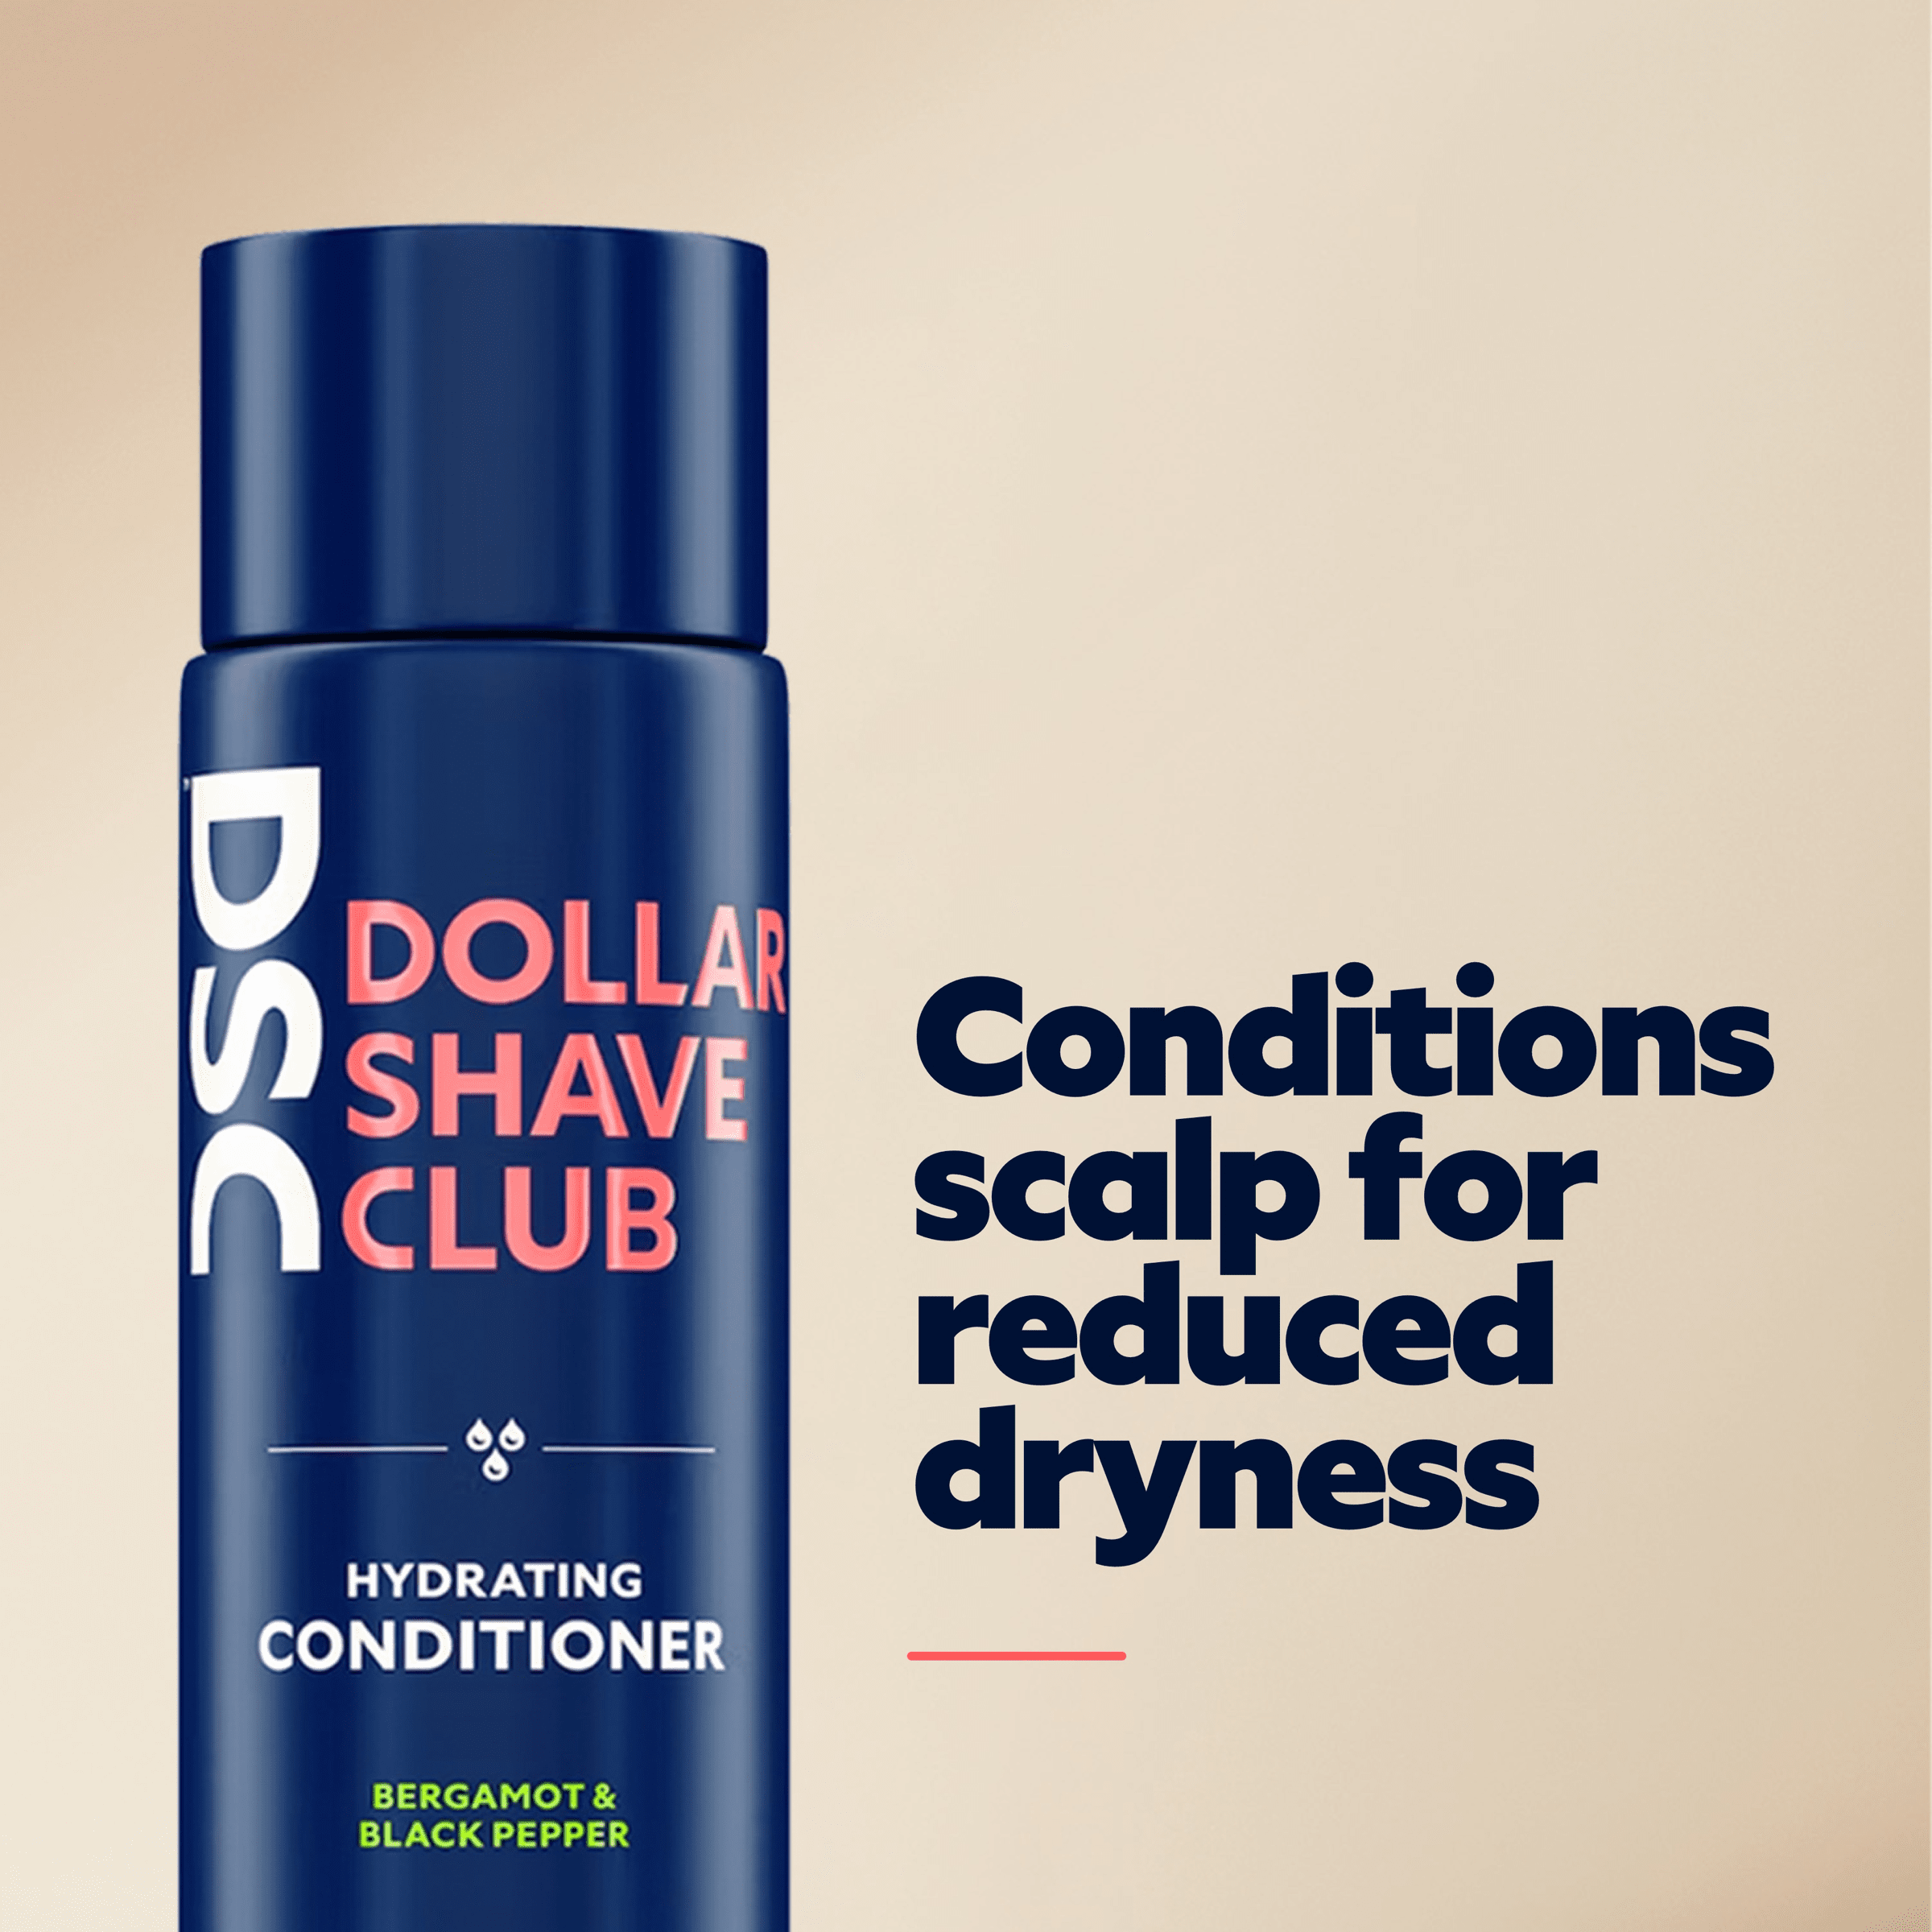 Dollar Shave Club Hair and Scalp Conditioner conditions scalp for reduced dryness.